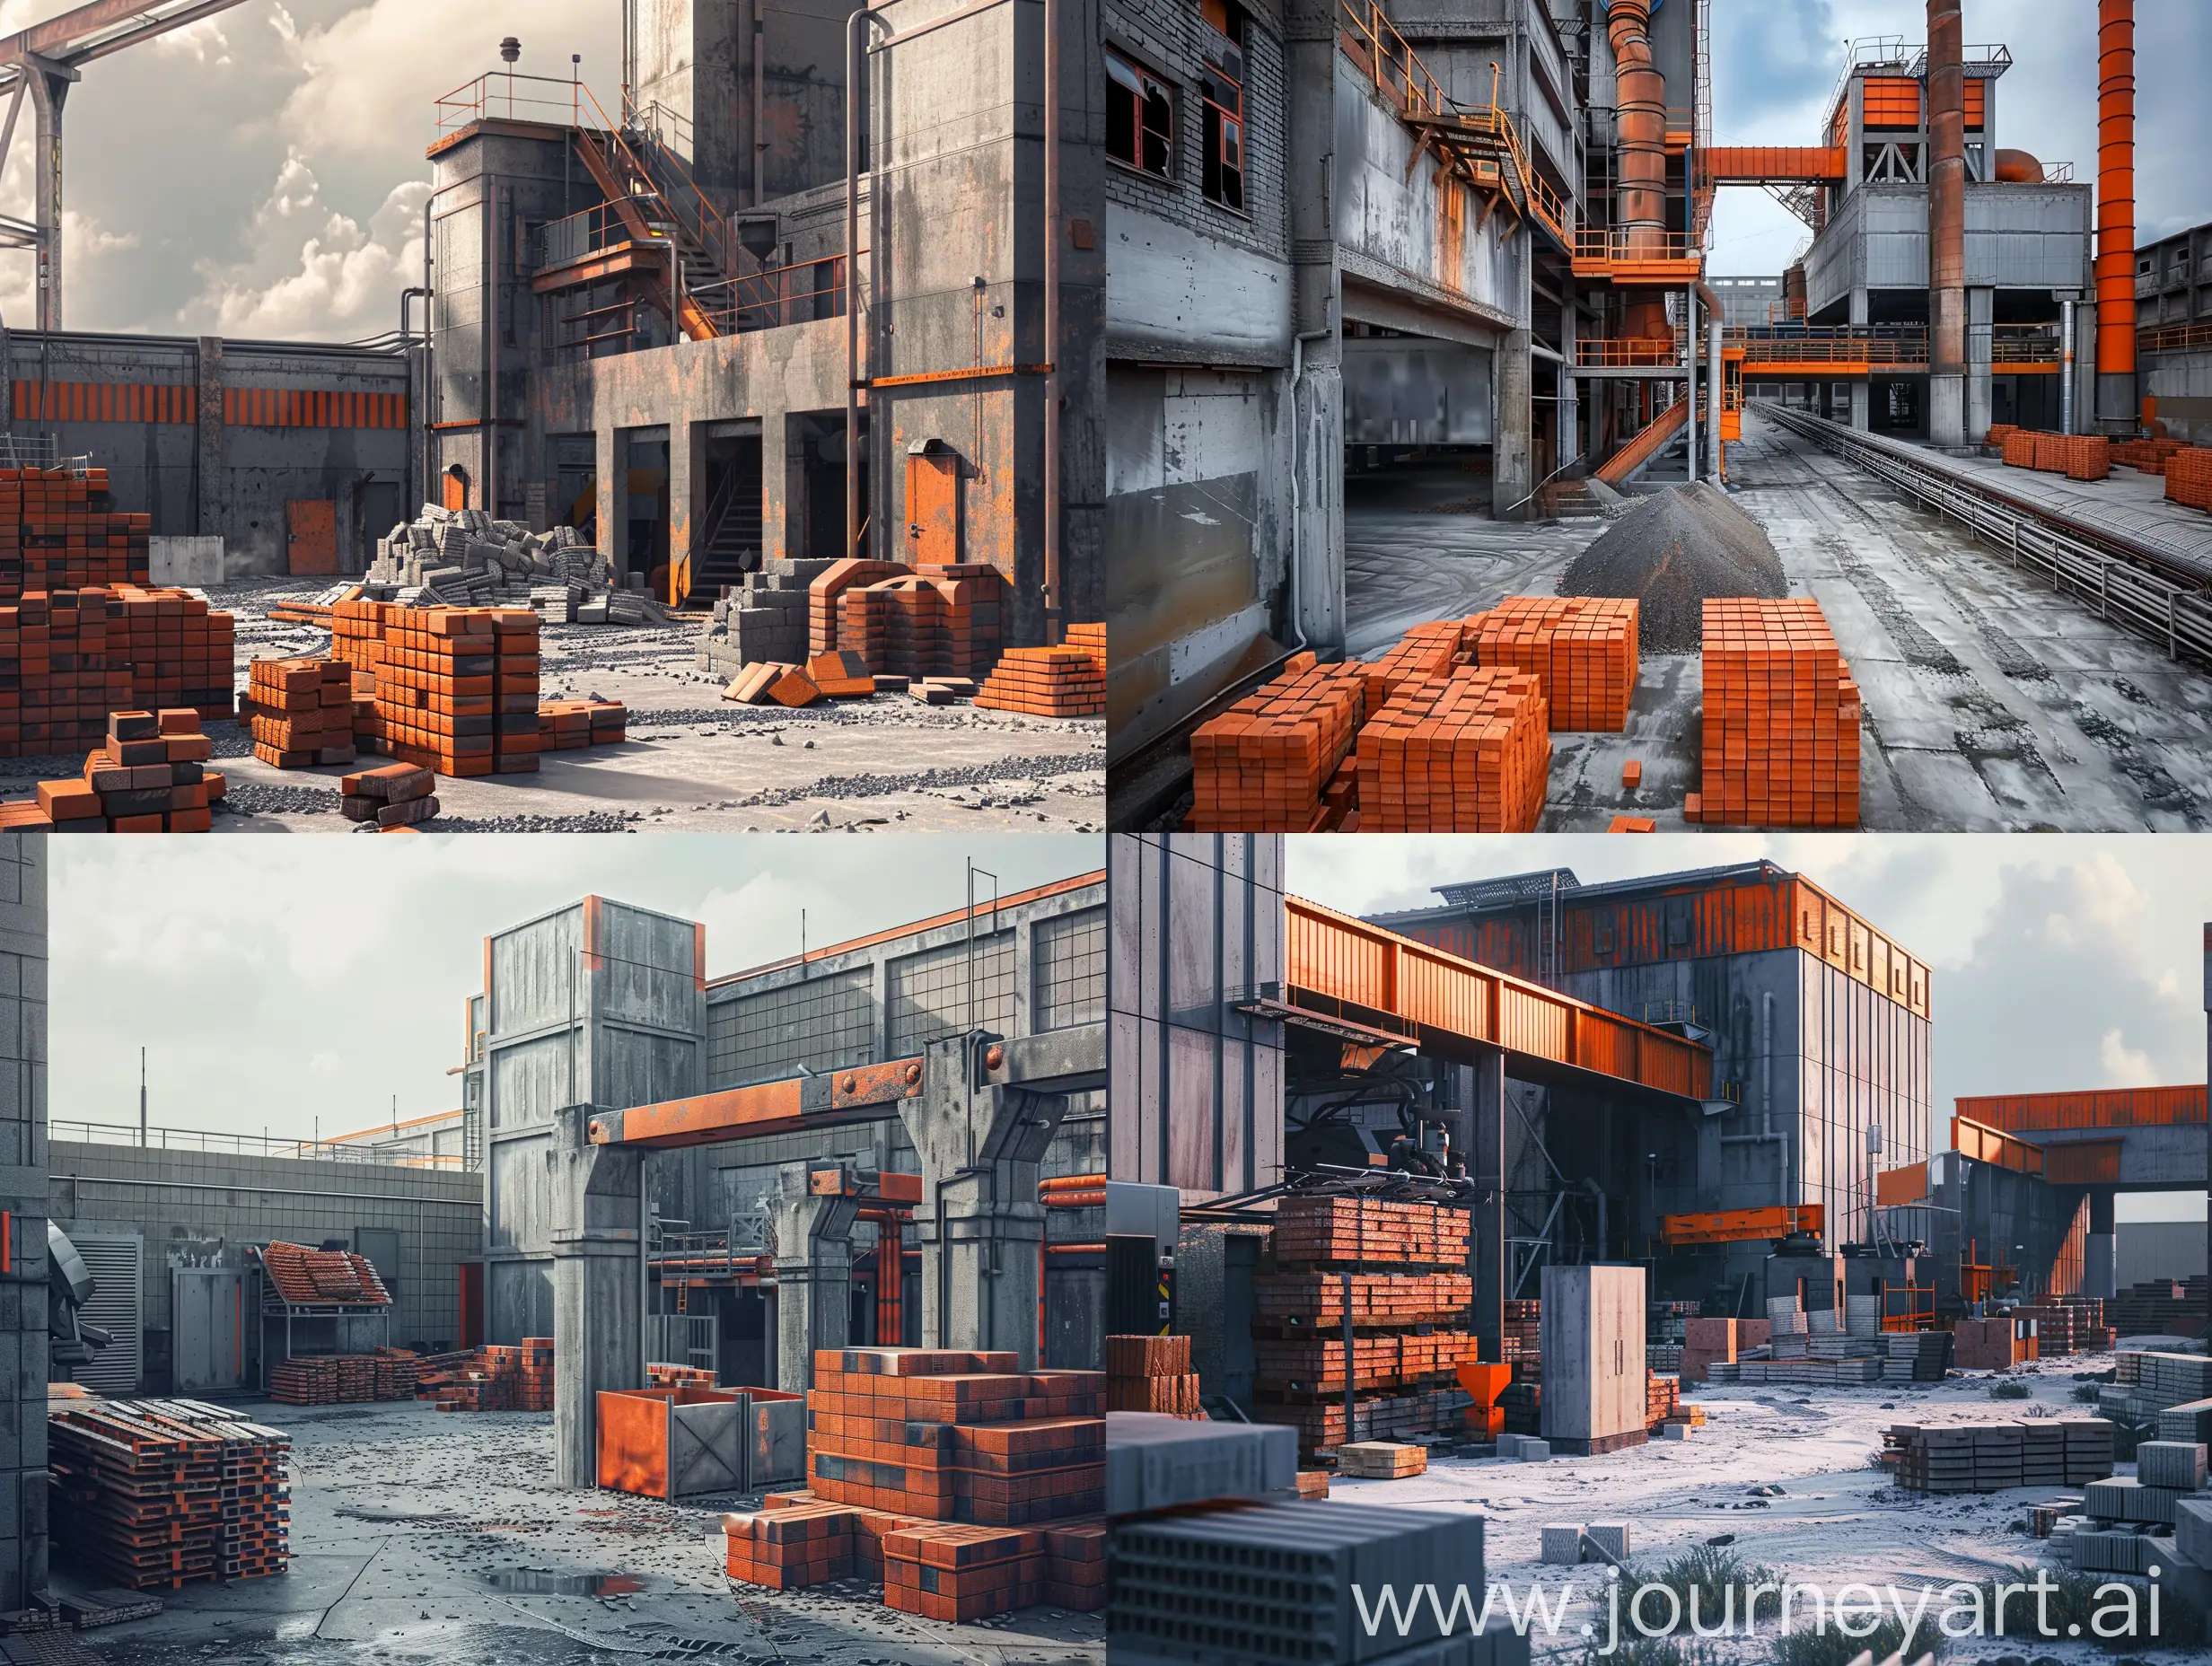 hyper realistic photo shoot of a very huge and equipped brick factory from outside, also there are some stacks of bricks placed in the yard if the factory, nice and pro, shot from semi far distance
dark gray and orange themed